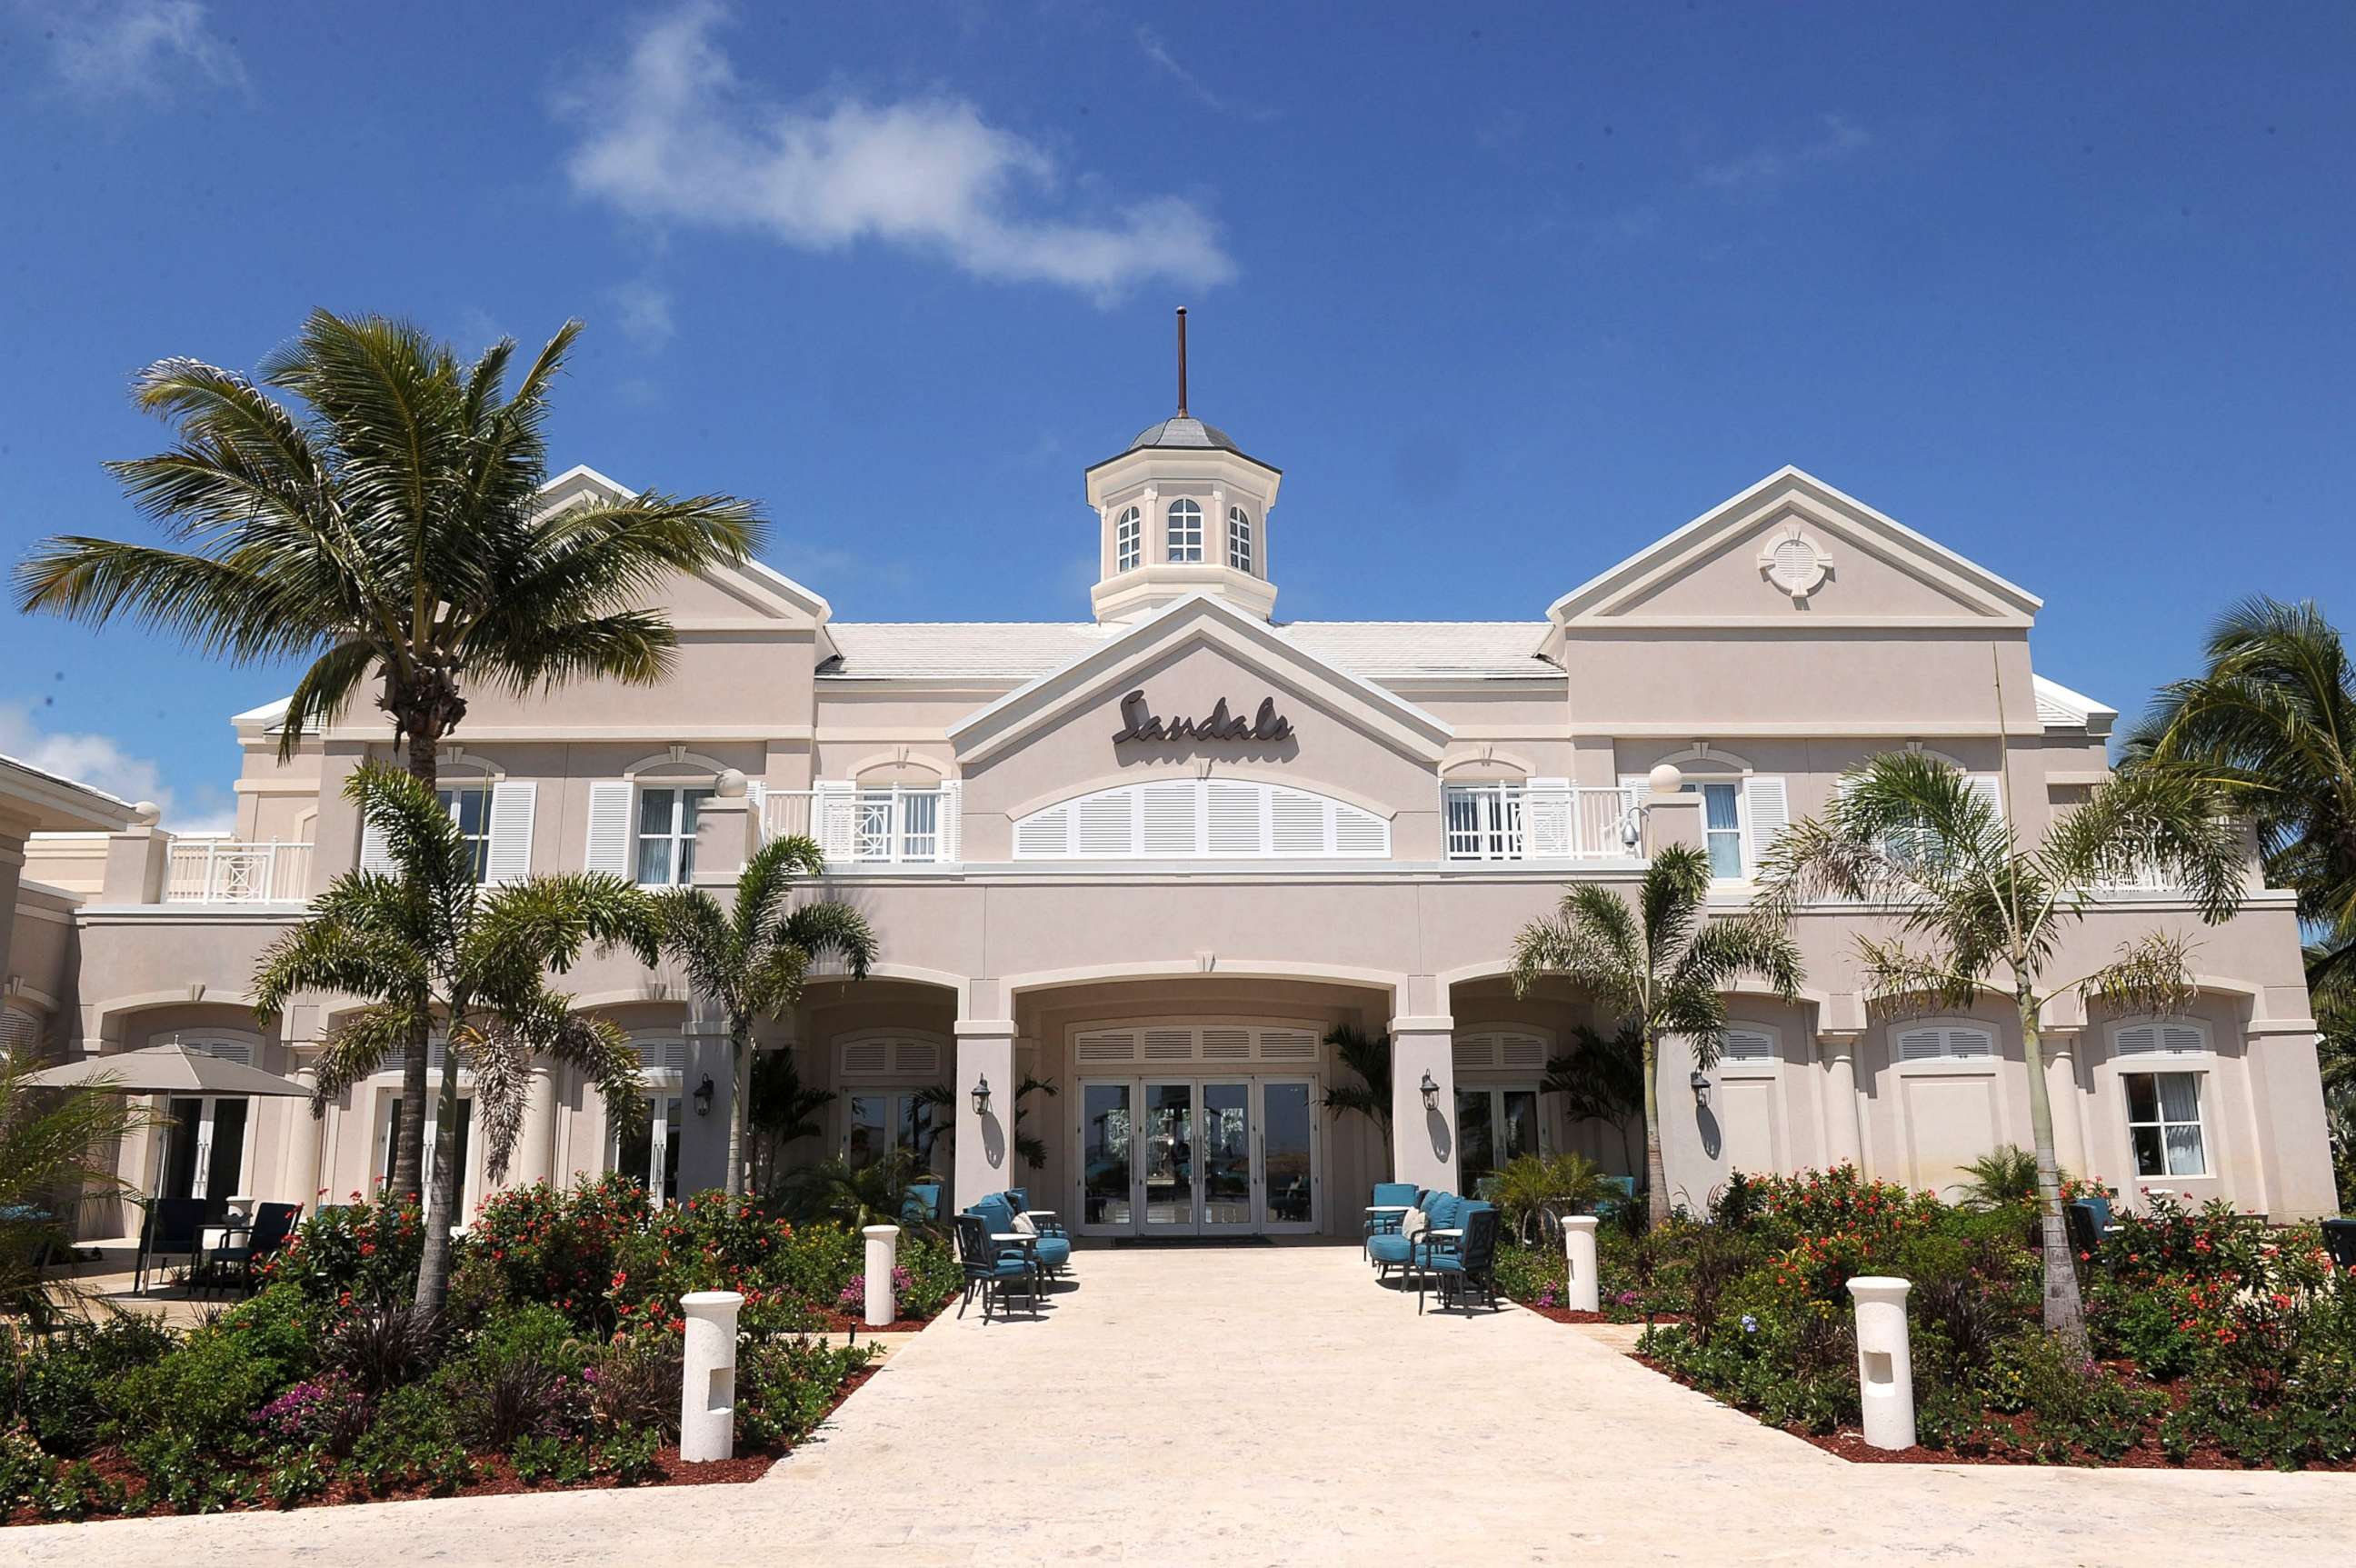 PHOTO: In this April 10, 2010, file photo, the Sandals Emerald Bay Resort is shown in Great Exuma Island, Bahamas.